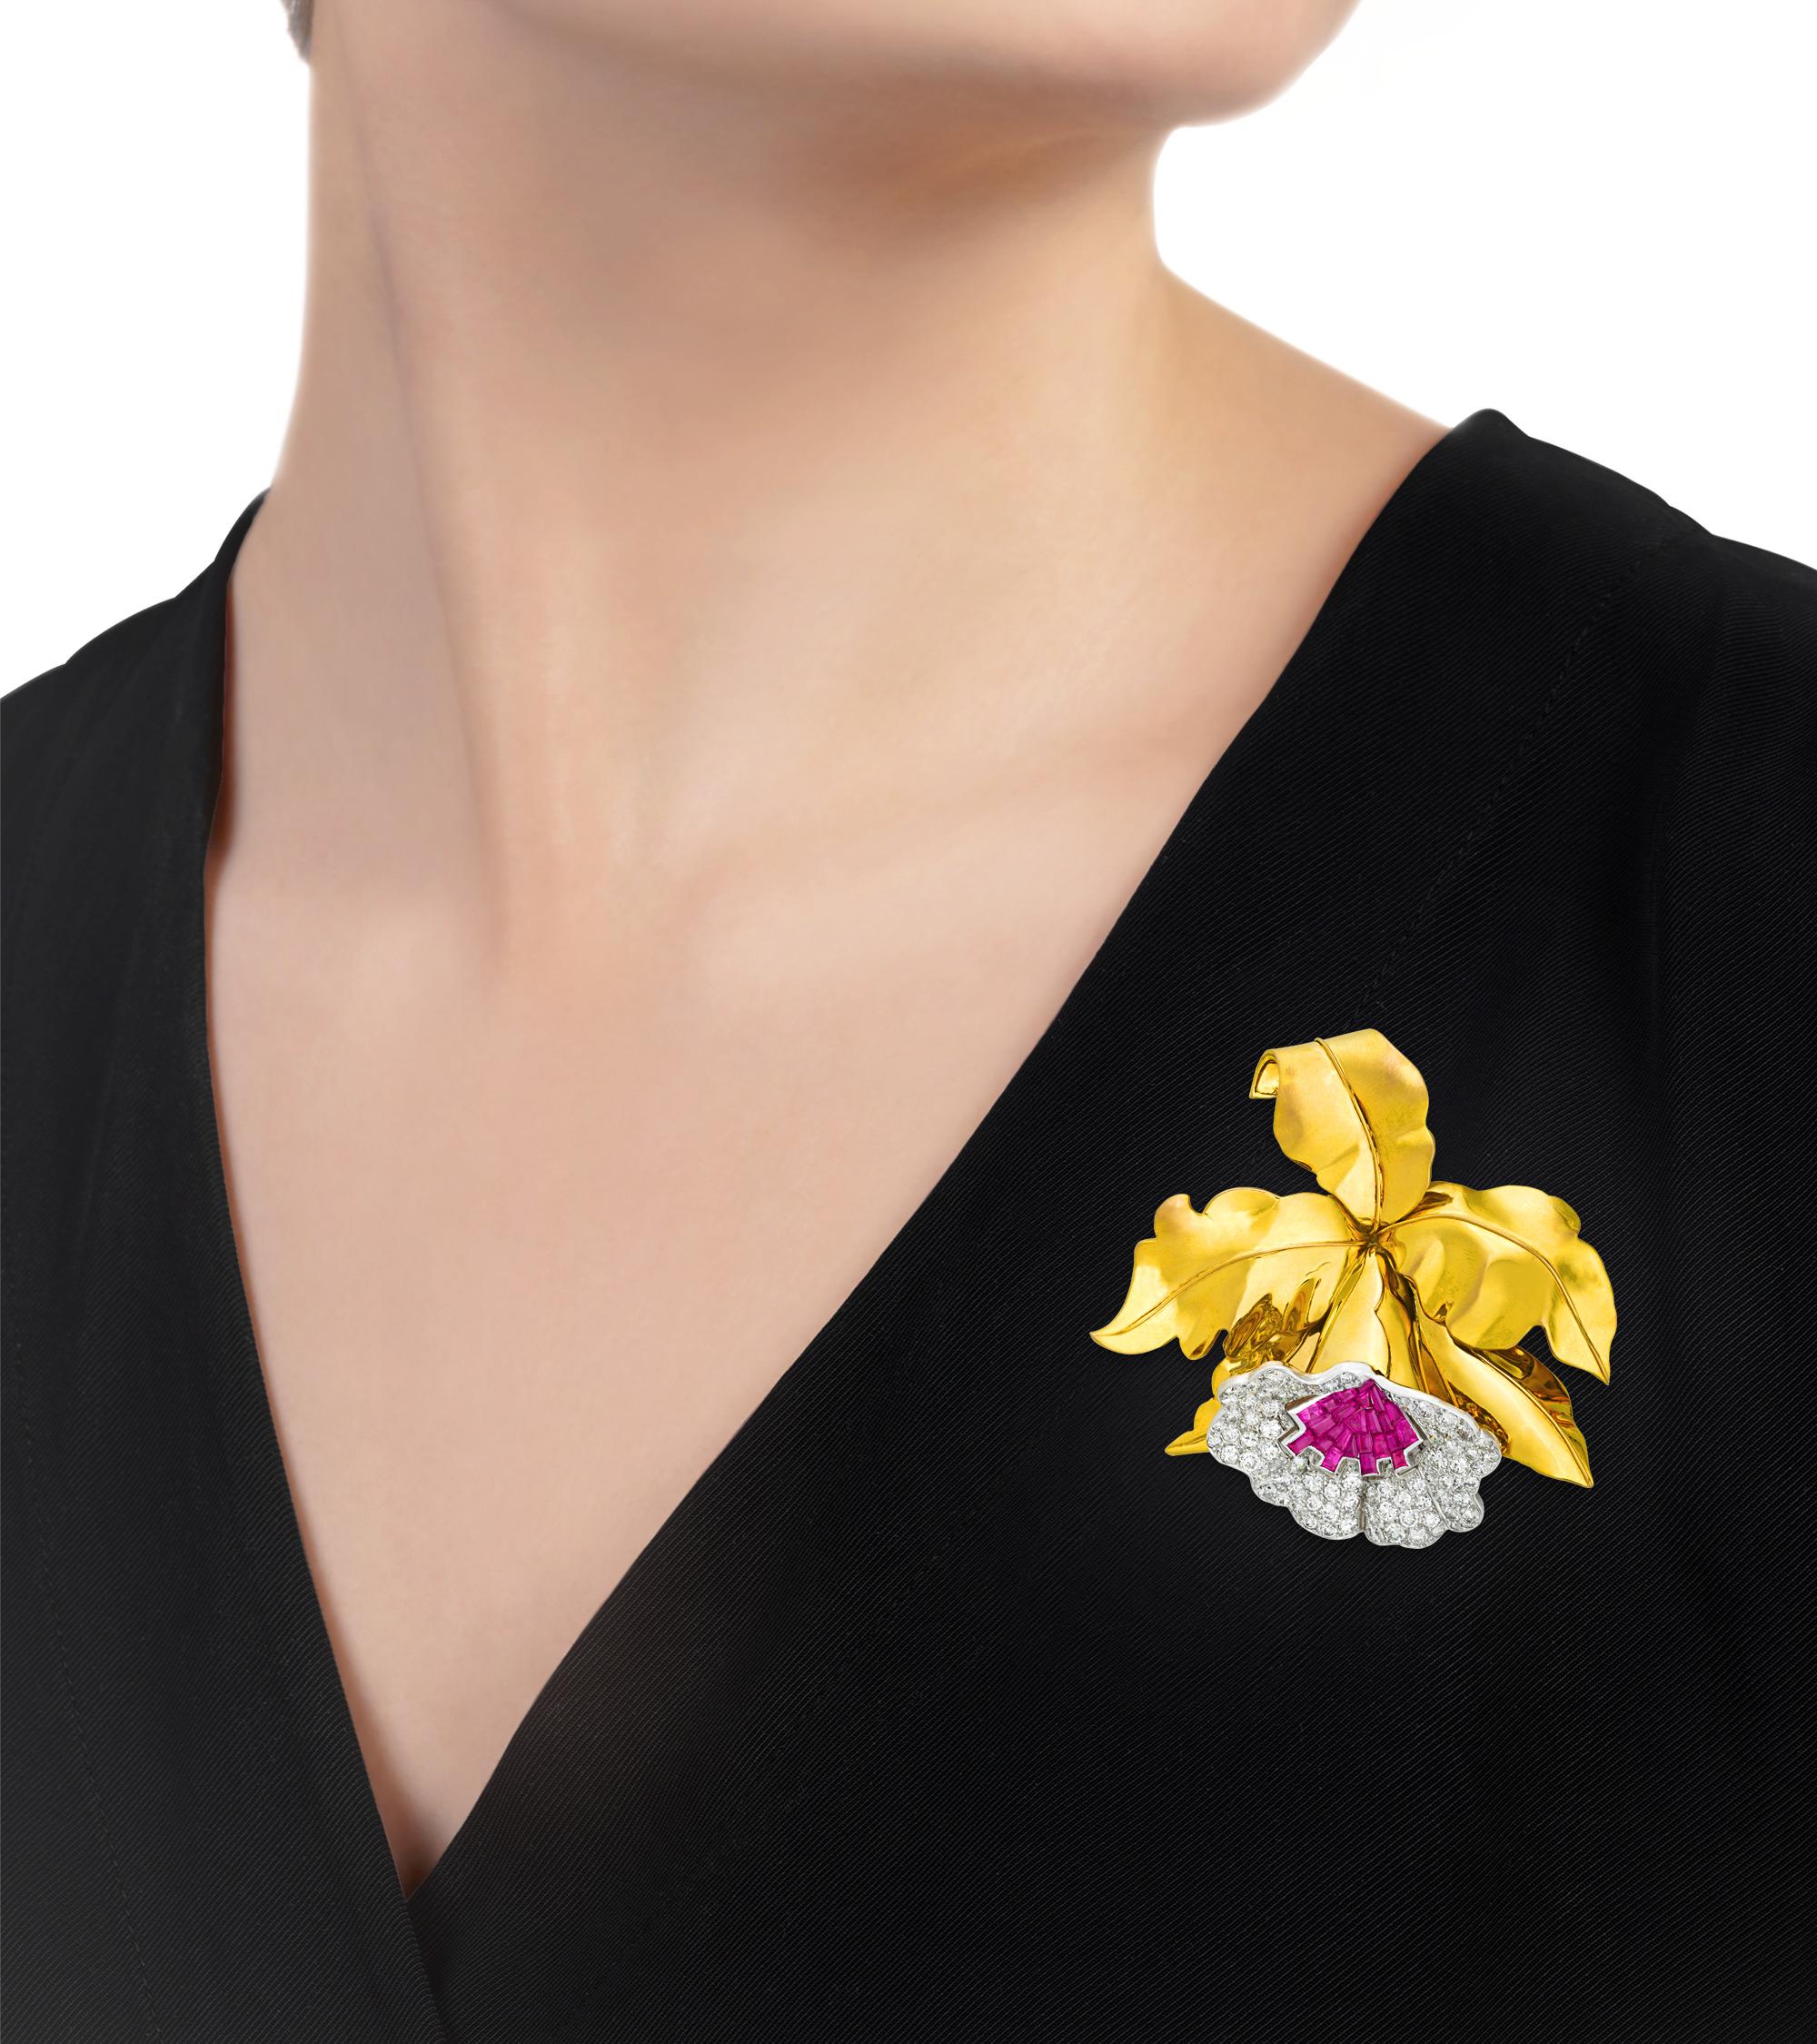 This sophisticated pin takes the form of a delicate French orchid. The floral brooch is accented by 85 diamonds totaling approximately 5.00 carats, and 22 rubies totaling approximately 3.00 carats. The glittering jewels shine in their 18K yellow